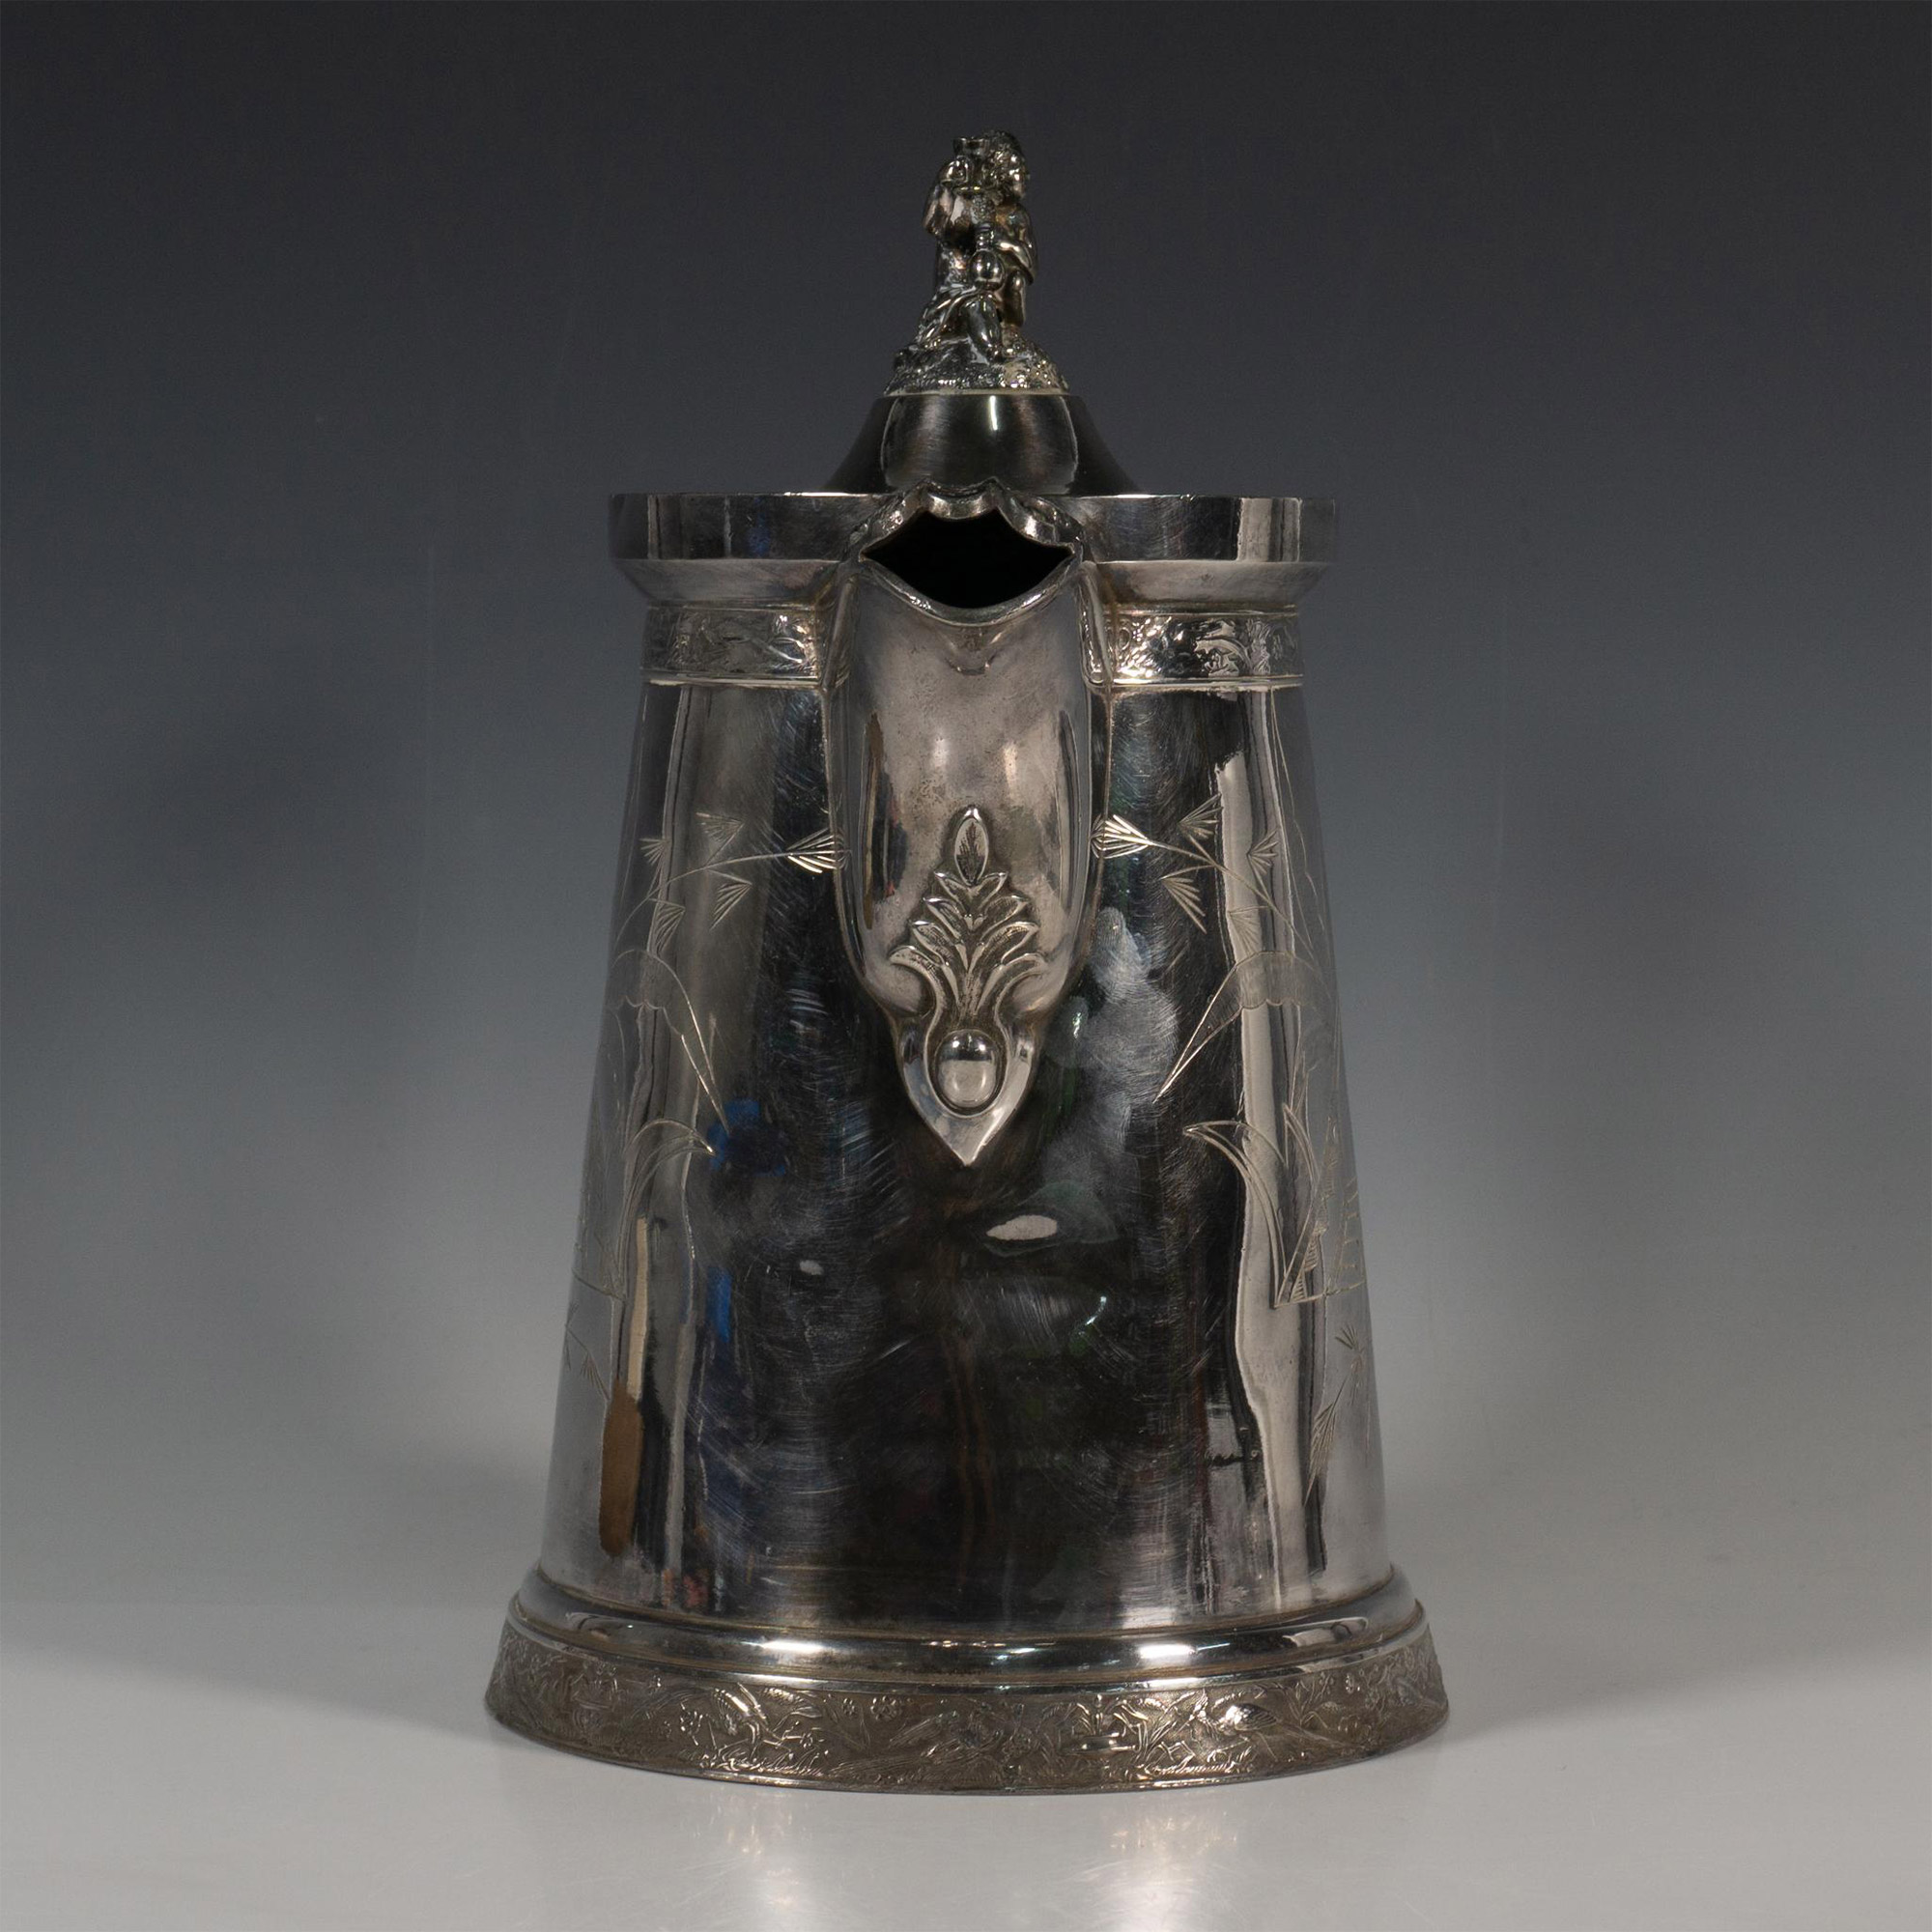 Original Victorian Large Silverplate Pitcher with Cupid Top - Image 3 of 5